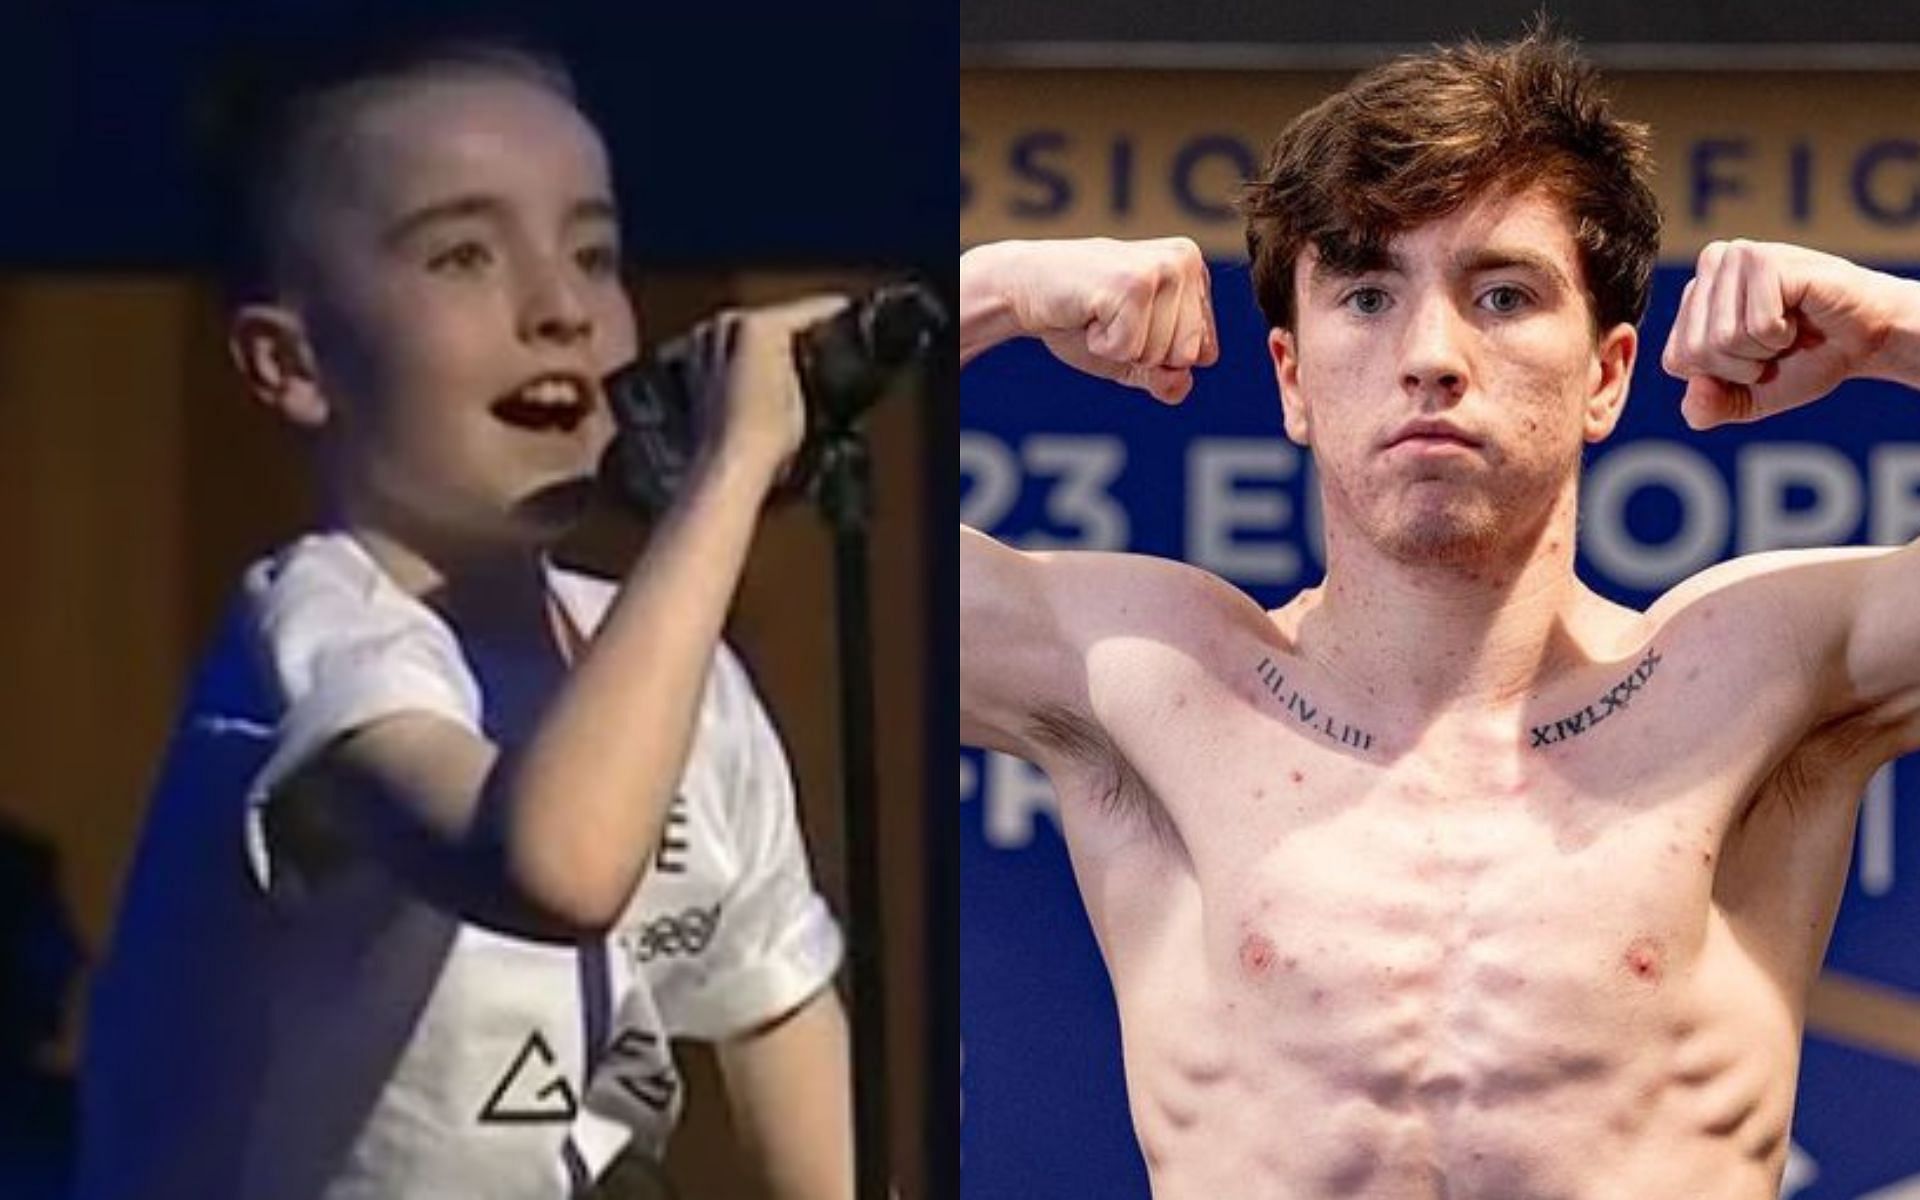 A young Nate Kelly (left) Nate Kelly now (right) [Image courtesy @MirrorFighting on YouTube and @natekellymma on Instagram]